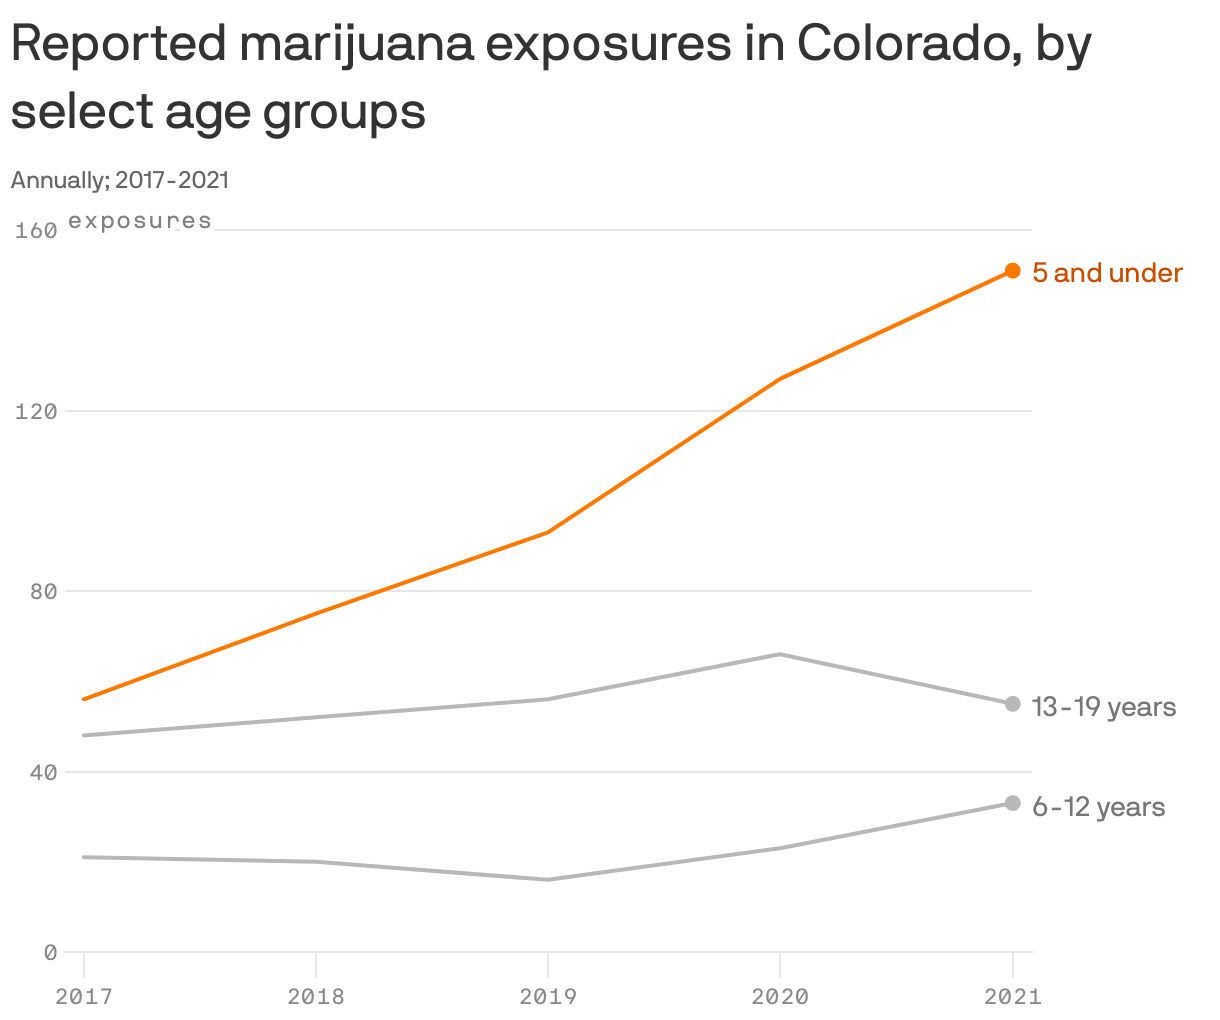 Reported marijuana exposures in Colorado, by select age groups